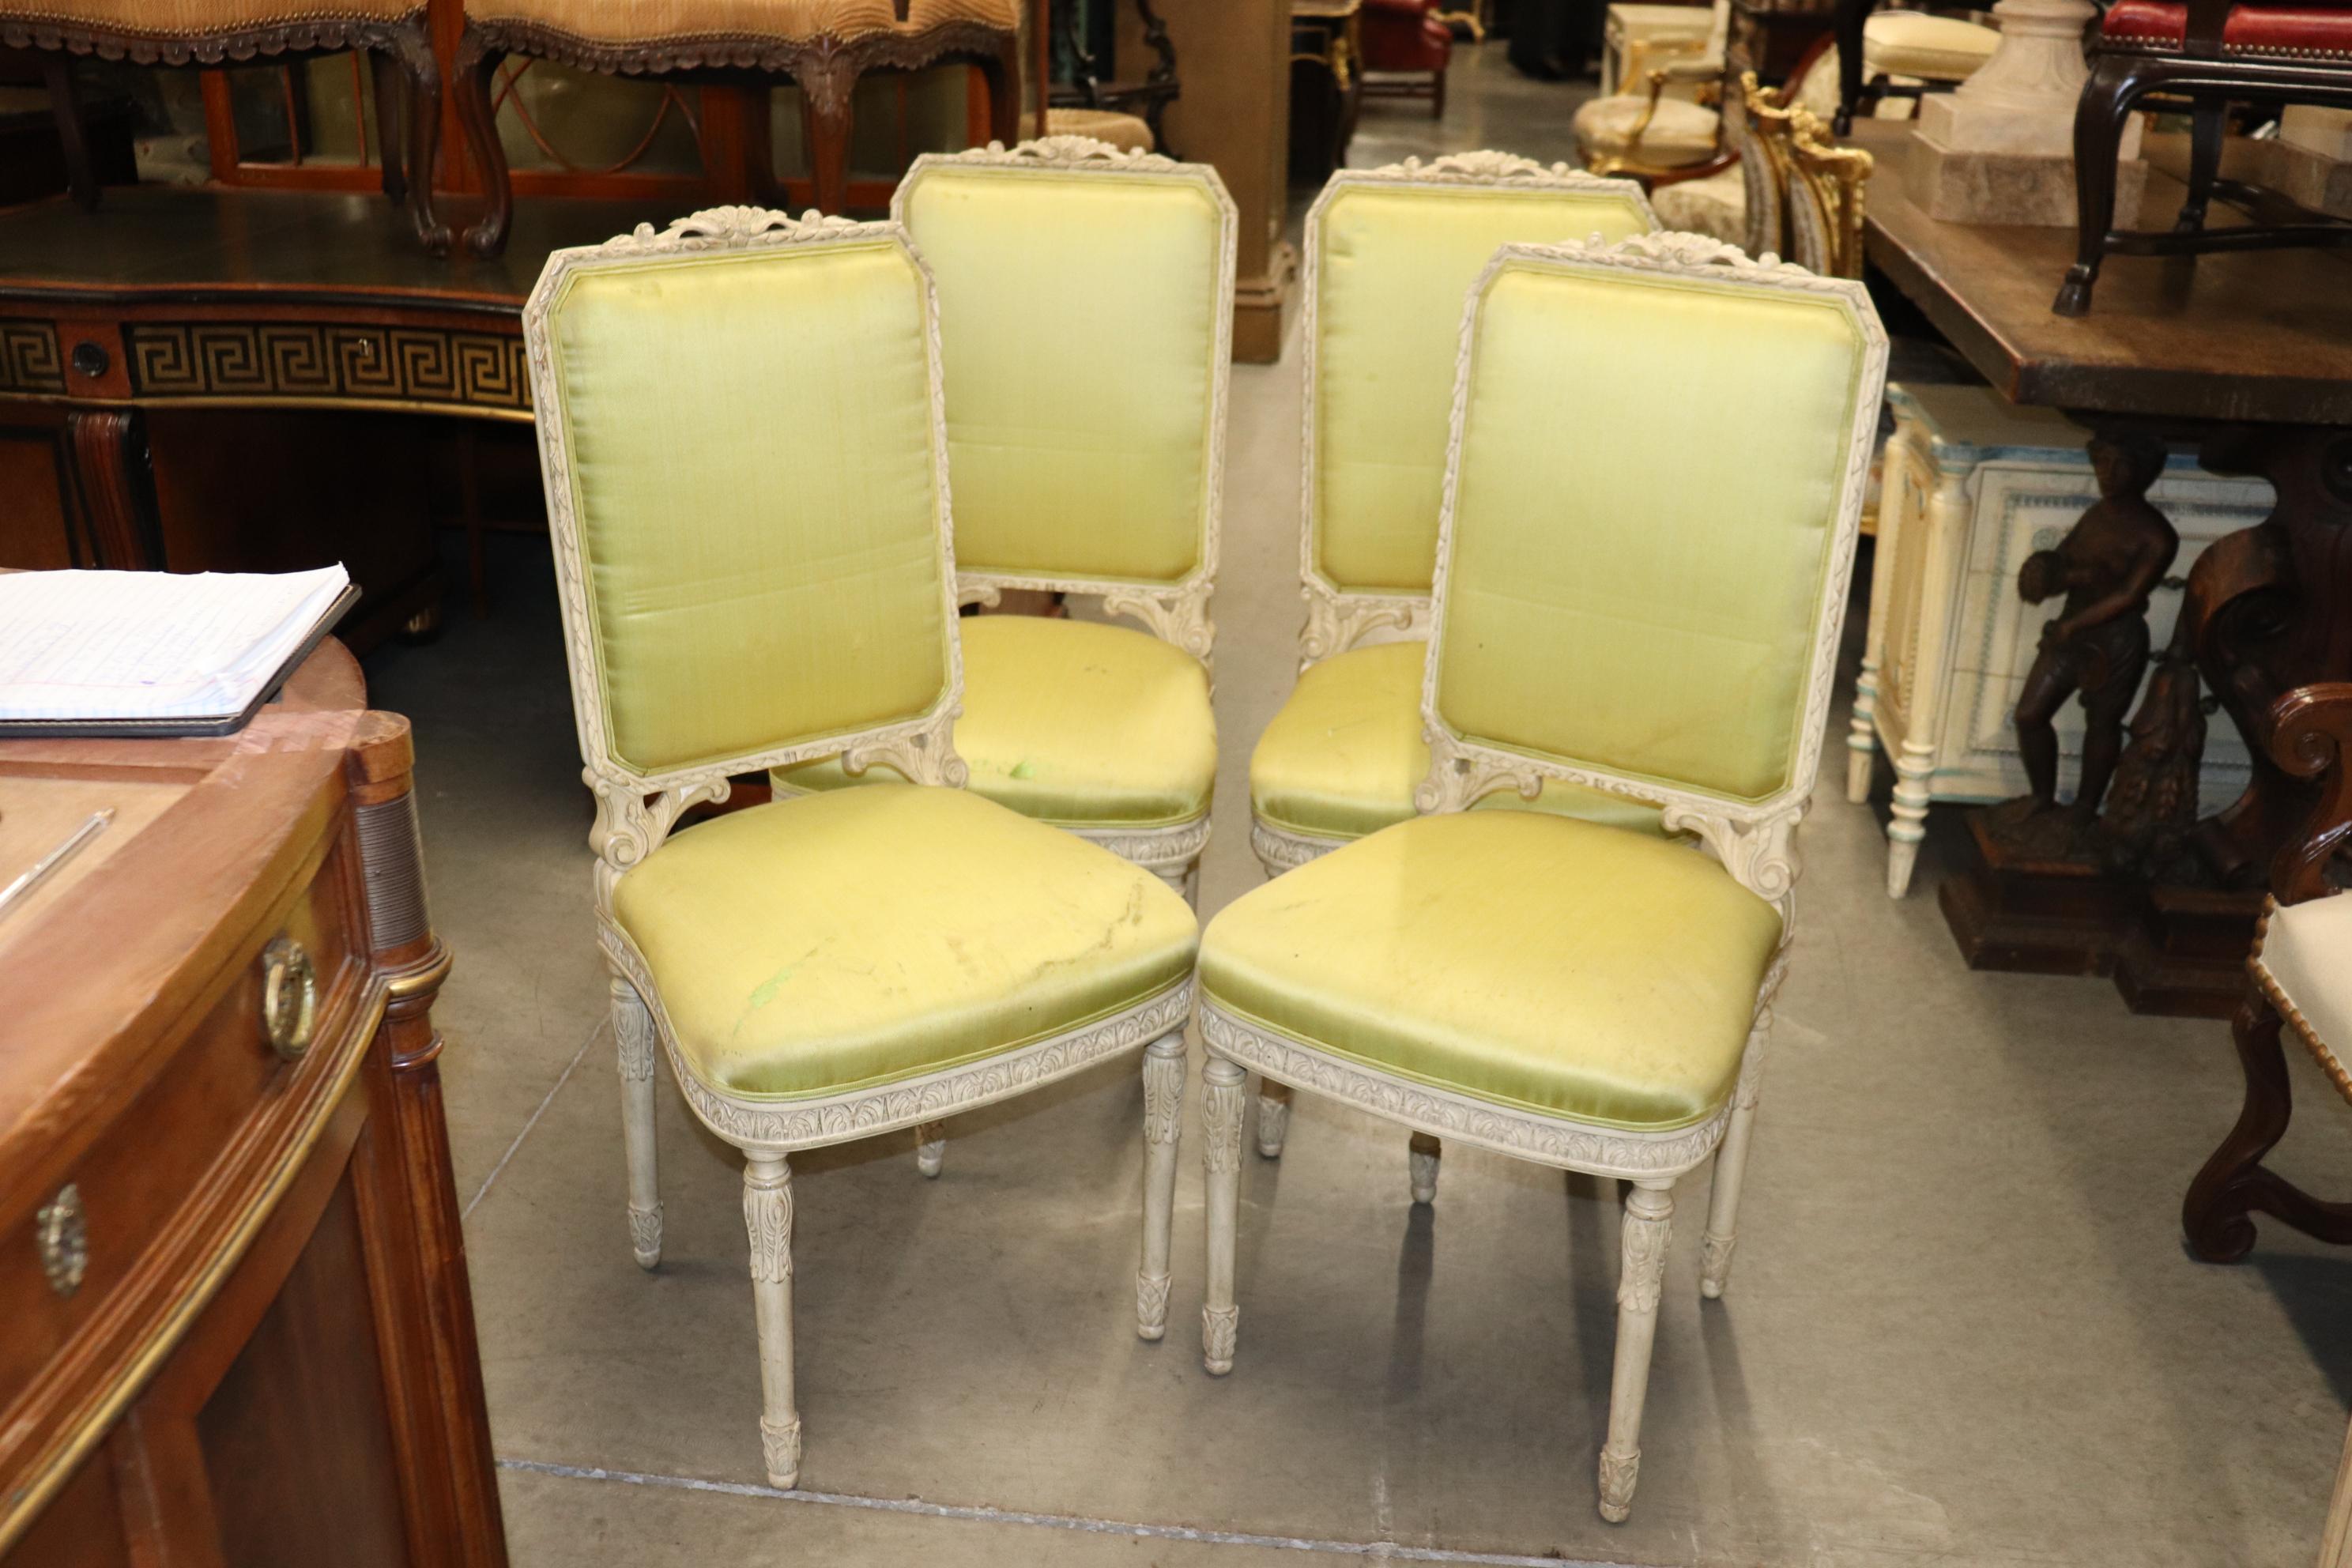 This is a rare set of fine French Louis XVI Maison Jansen style dining chairs. They are in their original silk upholstery it does show ear and signs of use. The frames are done in an antique white with restrained cavred details and simple and yet